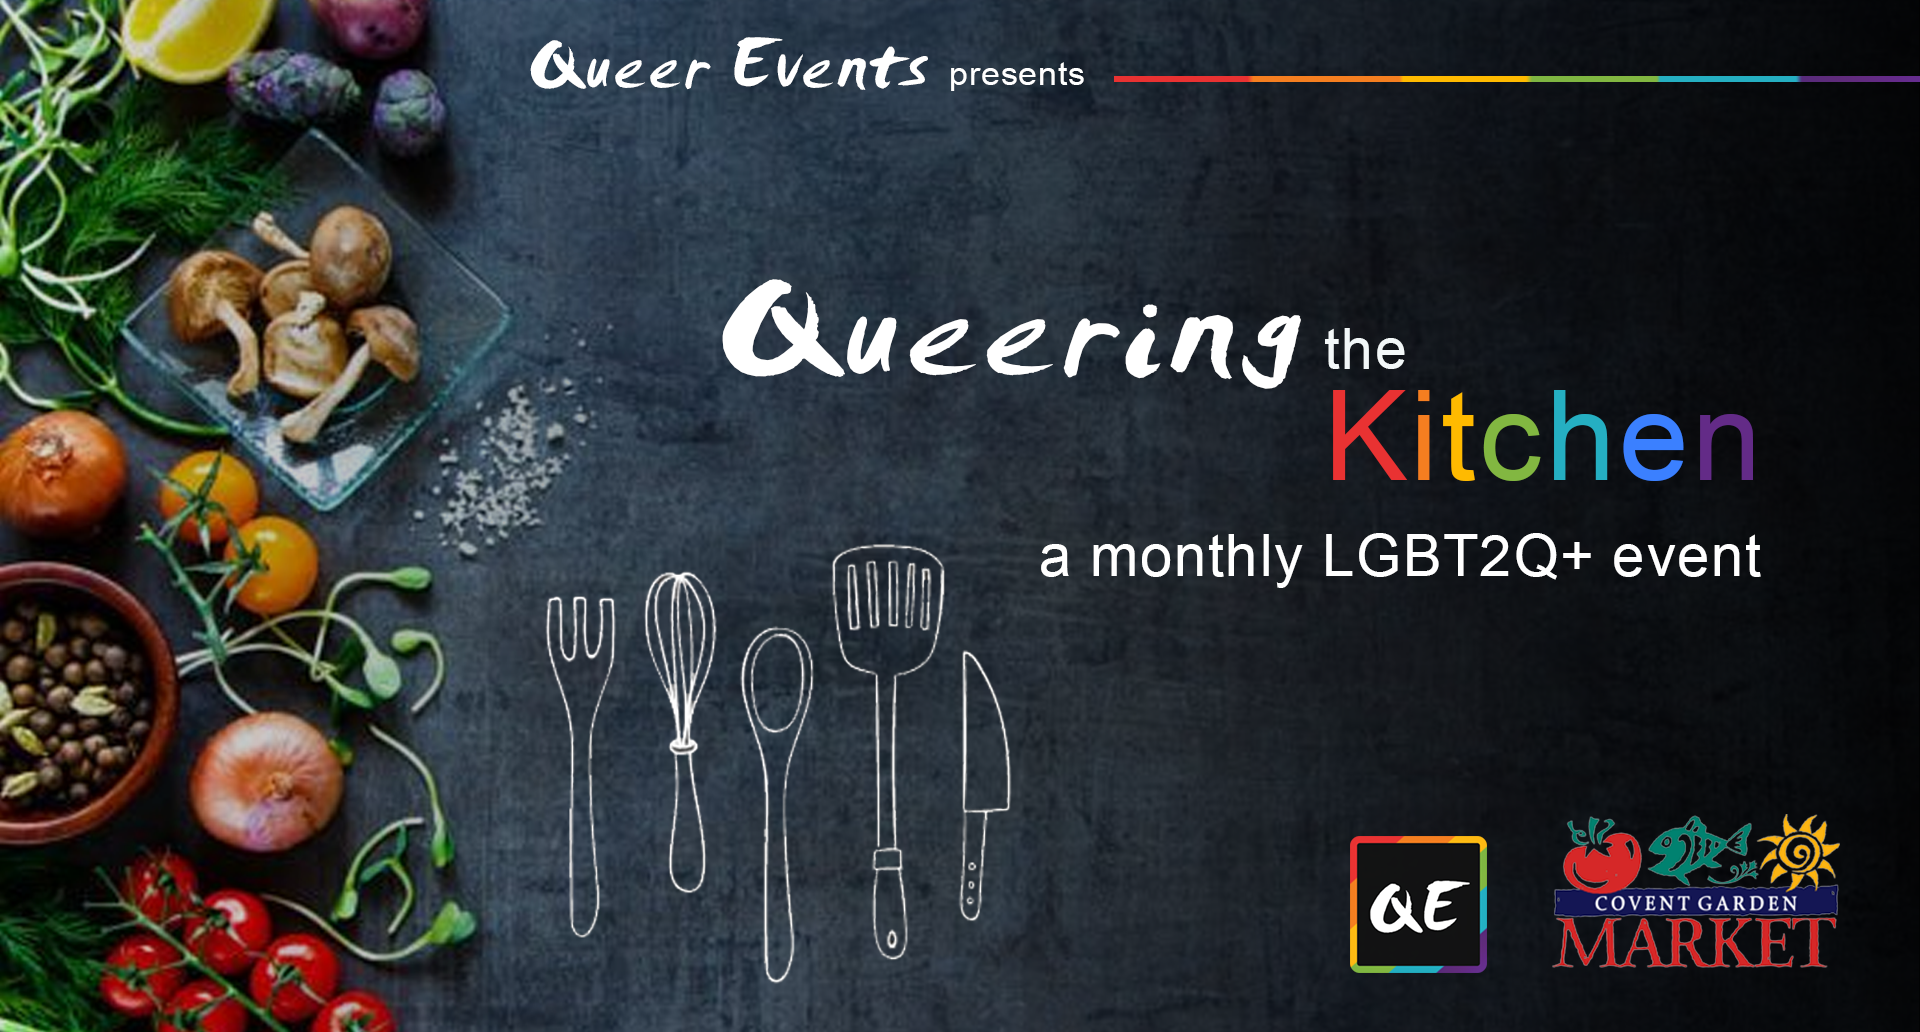 queer events presents monthly queer pub night